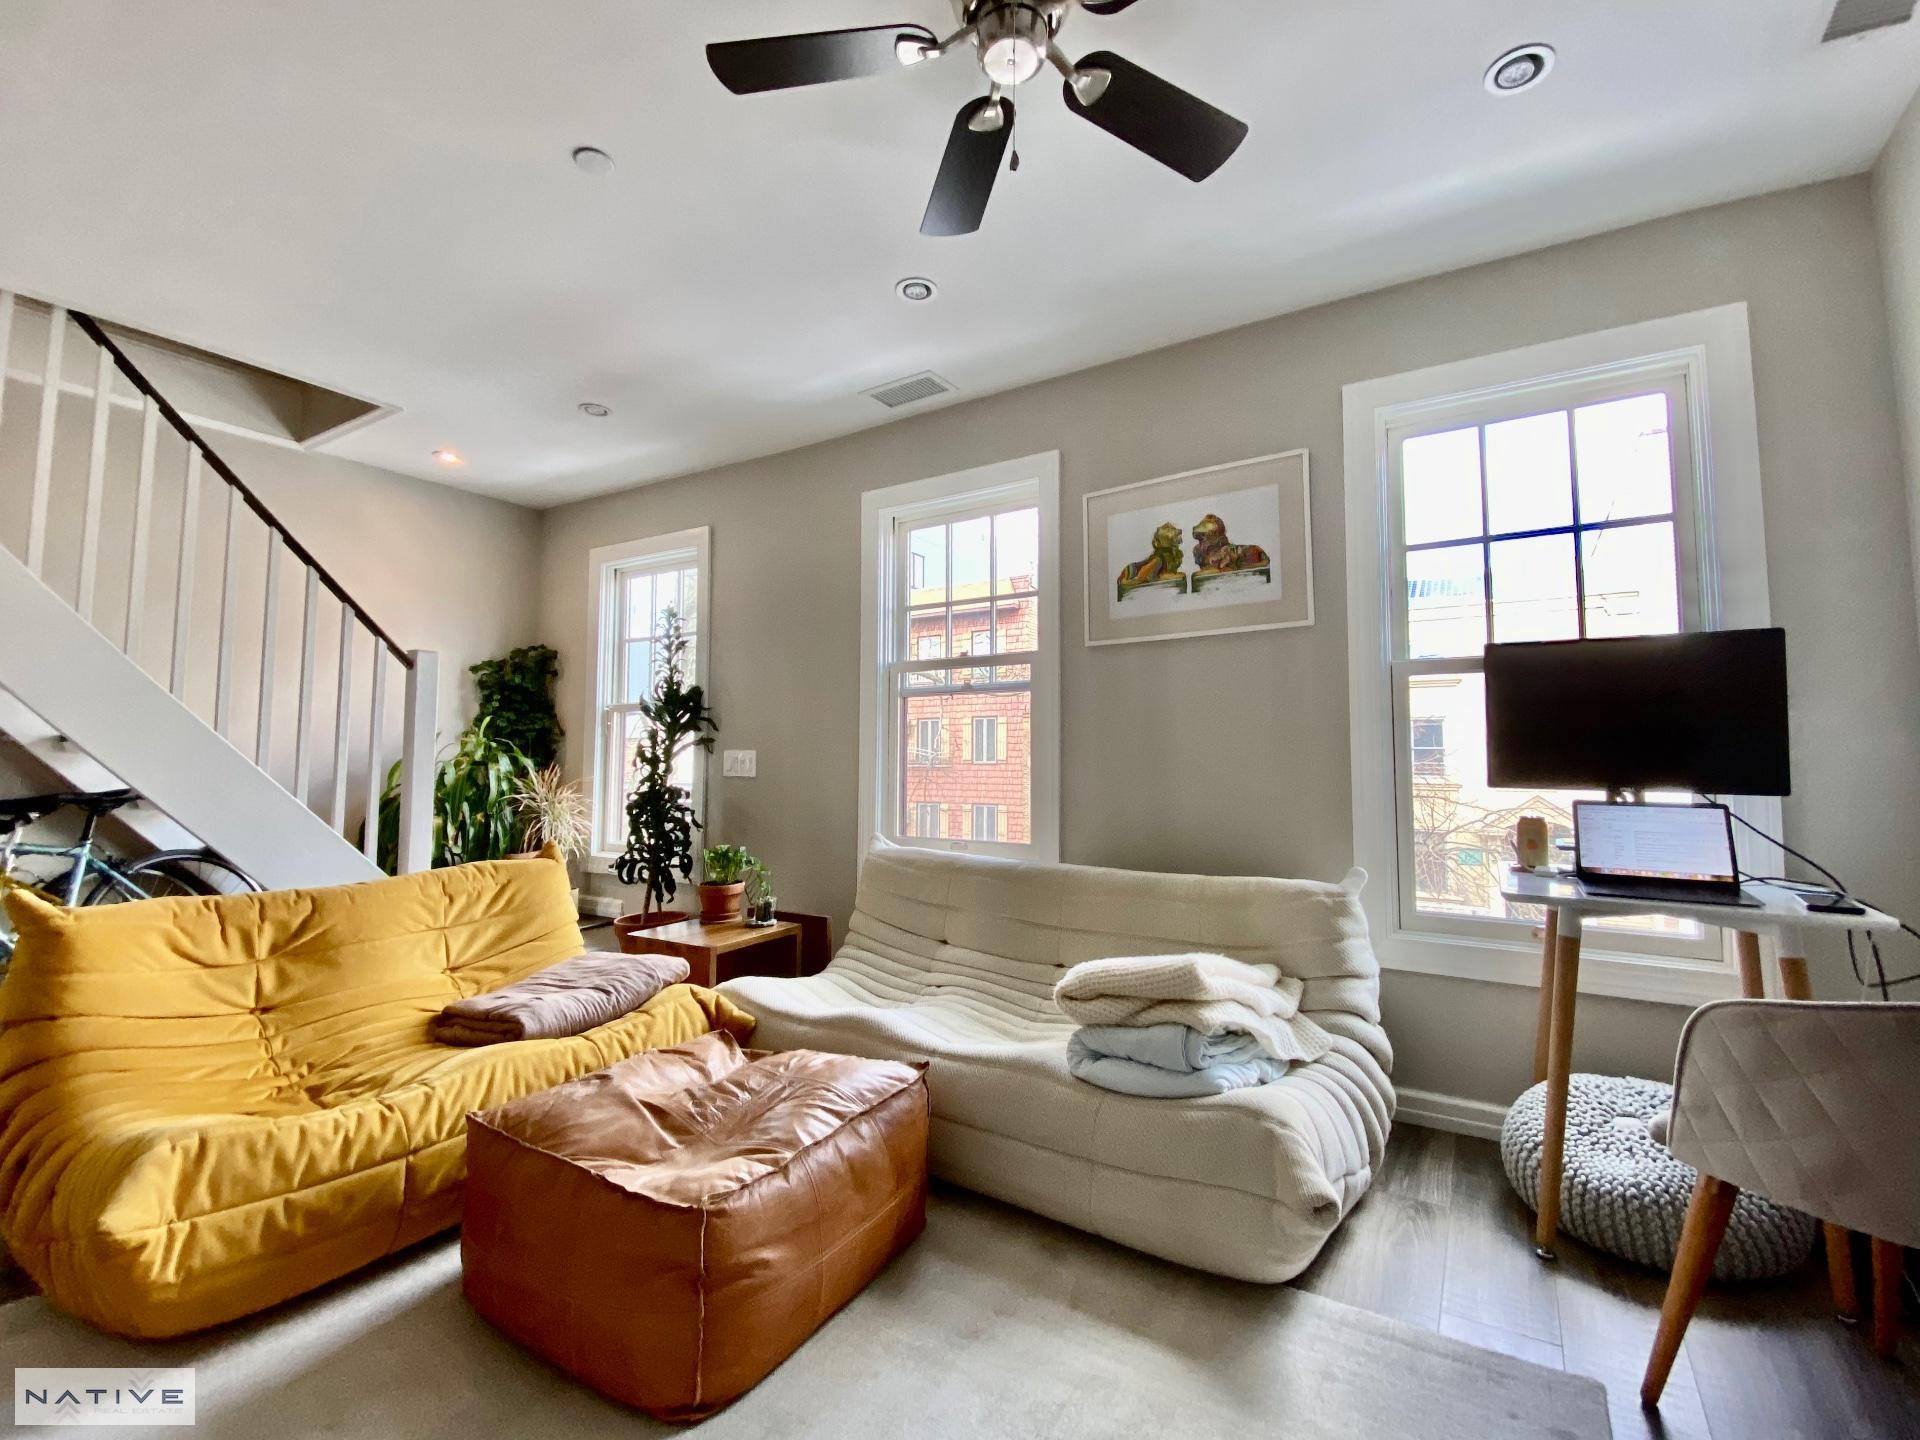 THIS IS IT ! You've finally found your dream apartment in Williamsburg.